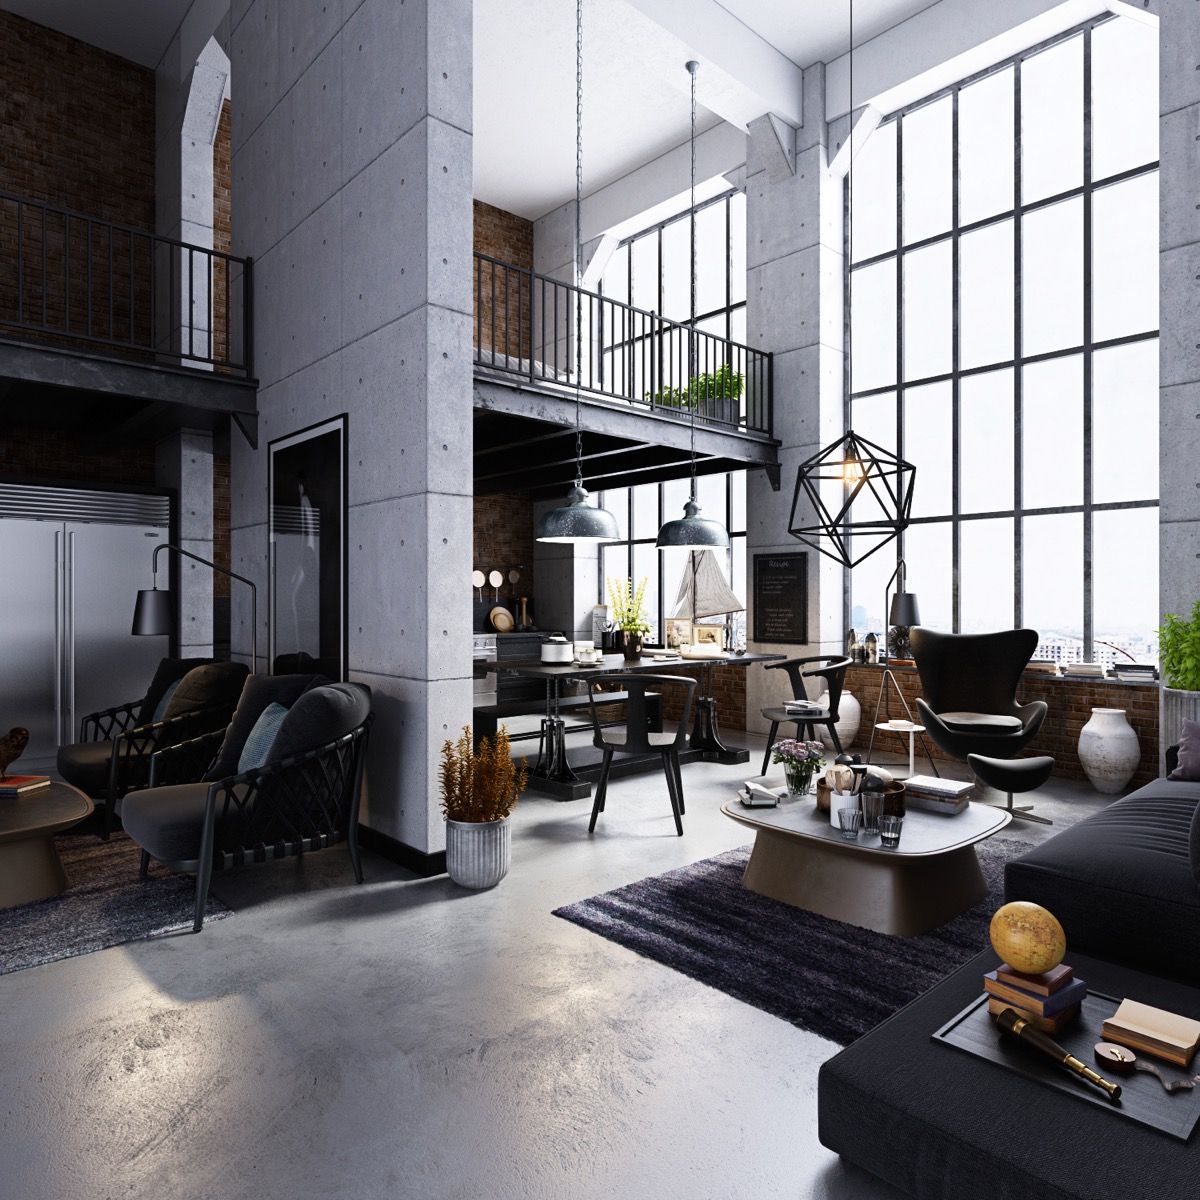 The Edgy Elegance: Industrial Design Meets Luxury Living